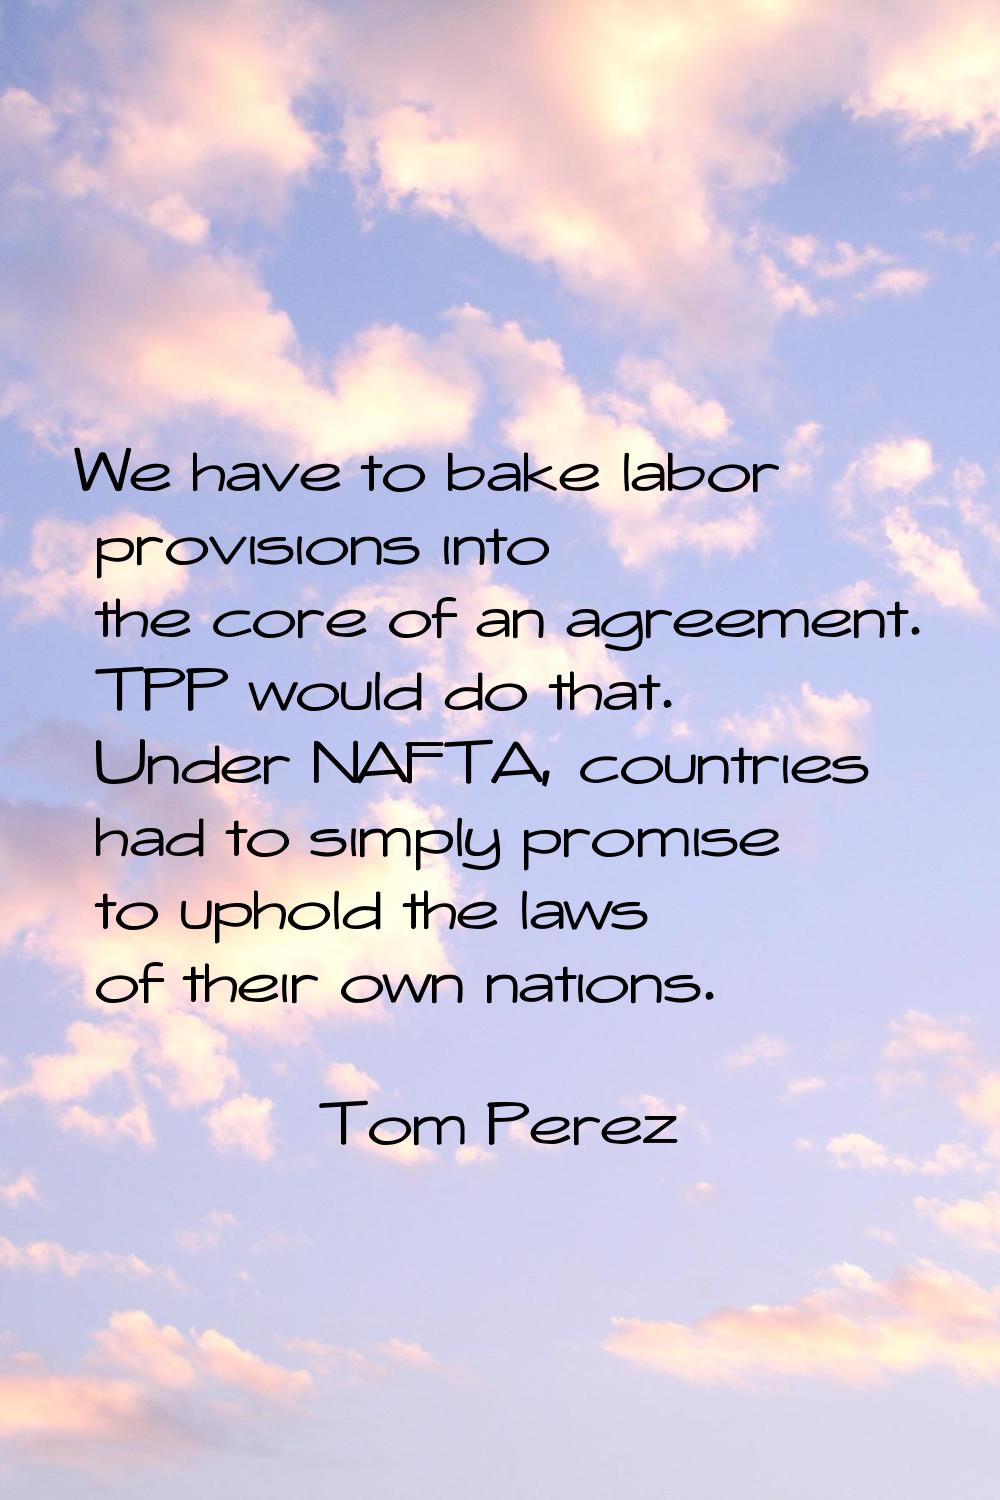 We have to bake labor provisions into the core of an agreement. TPP would do that. Under NAFTA, cou